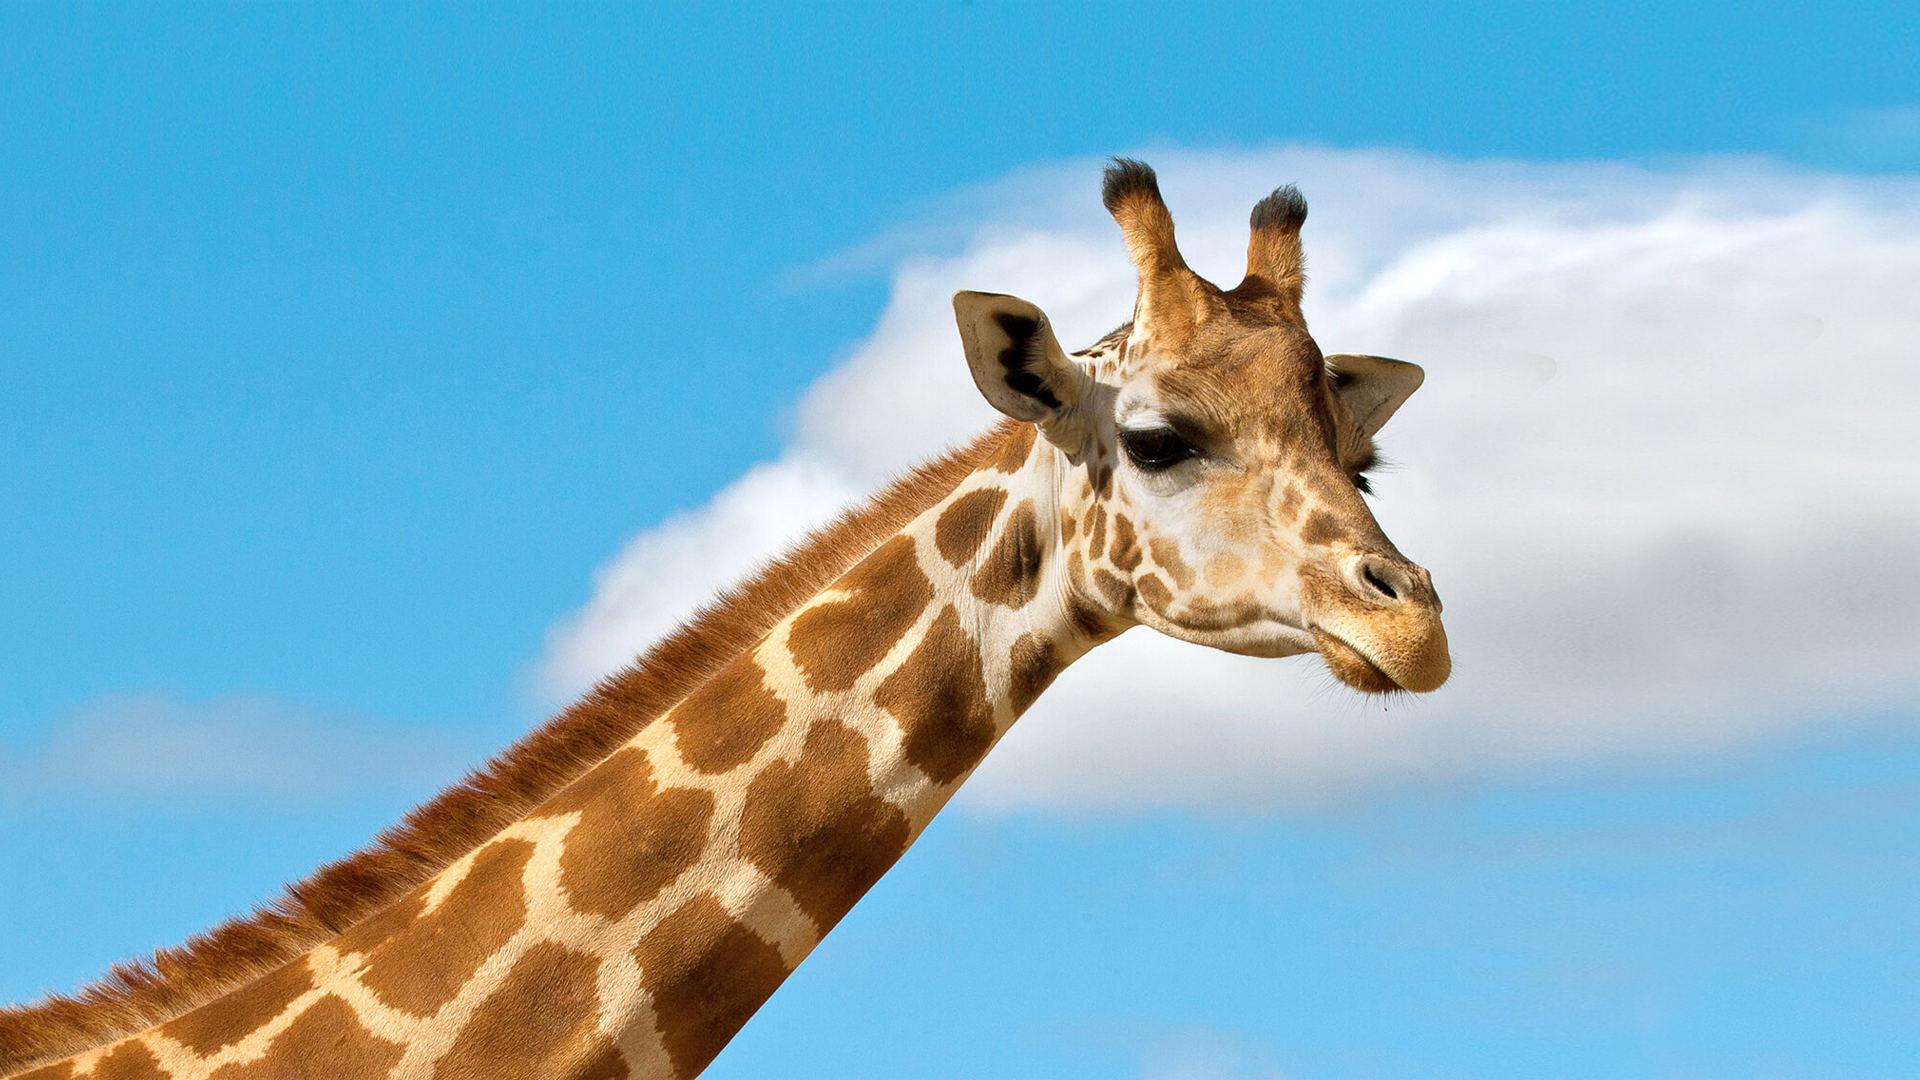 Giraffes get protections against international trade for the first time at Geneva Summit